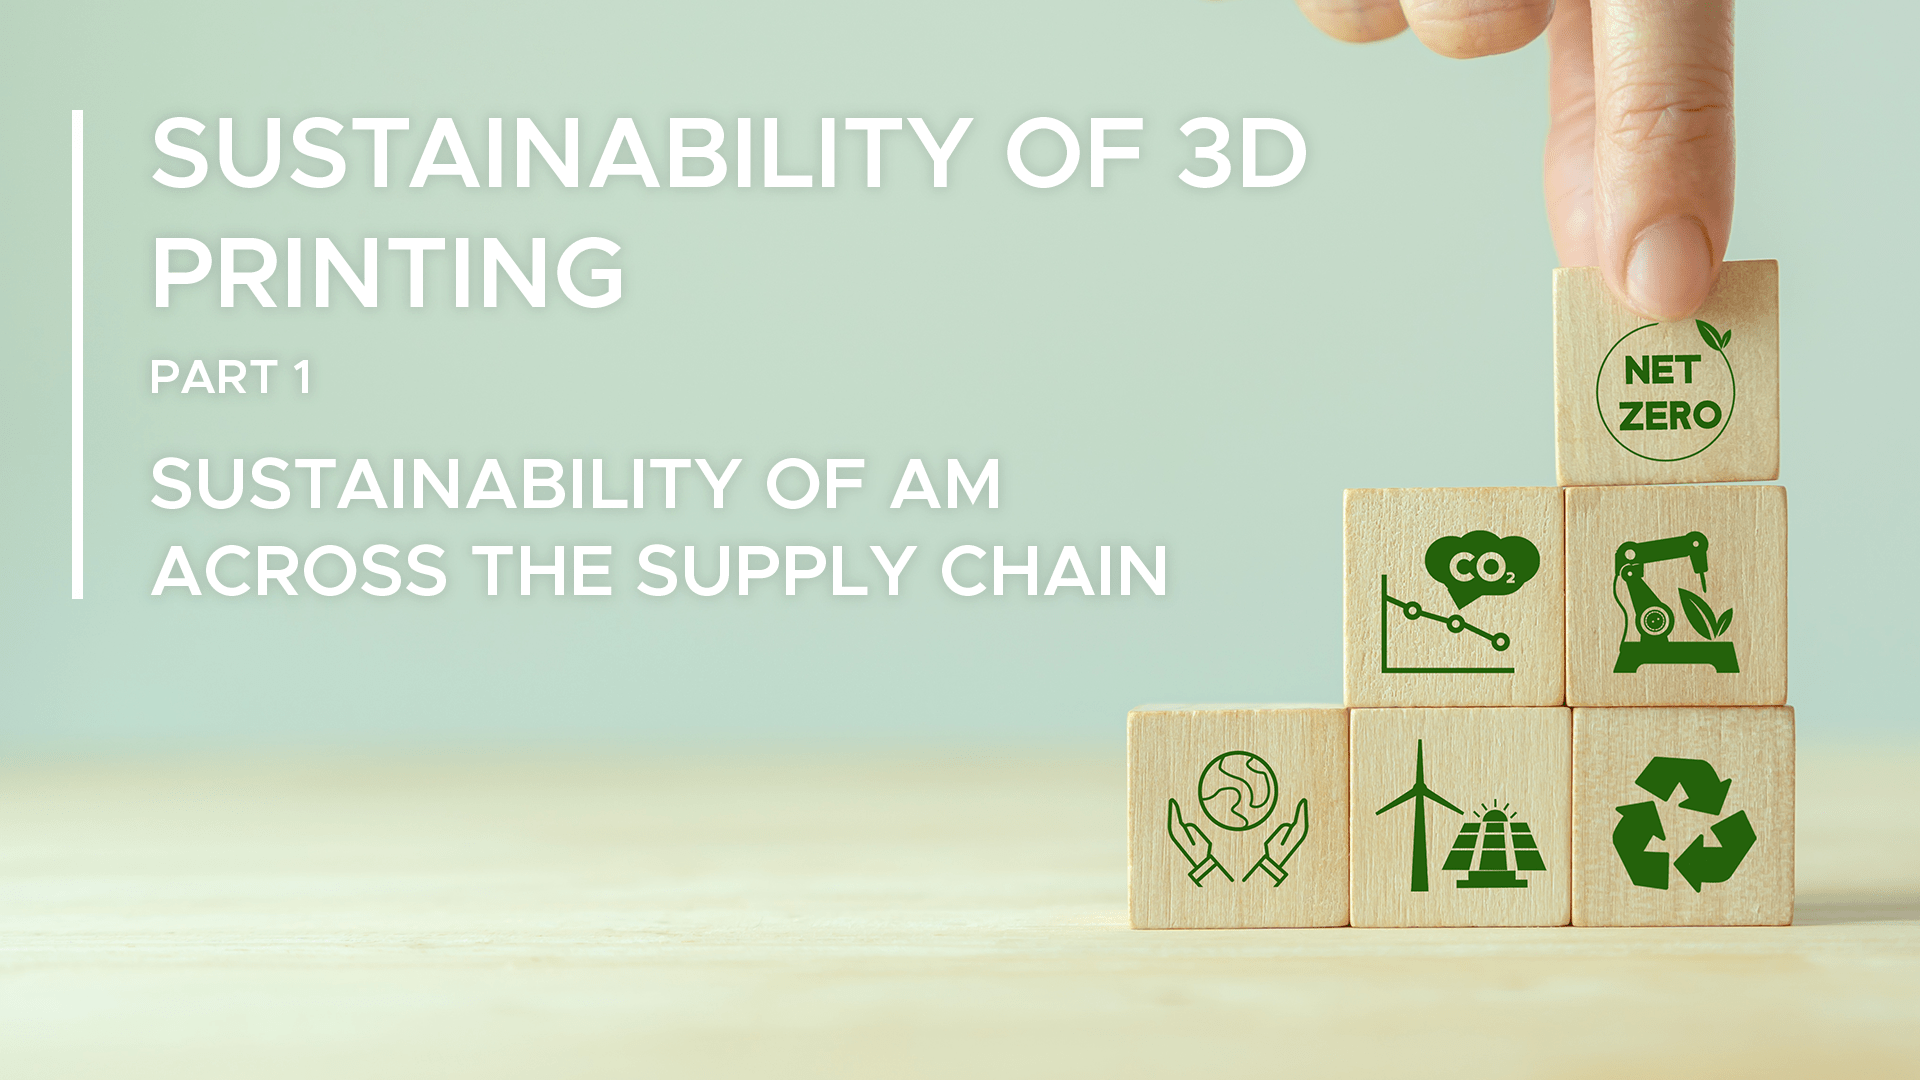 How 3D printing sustainability across the supply chain - Replique